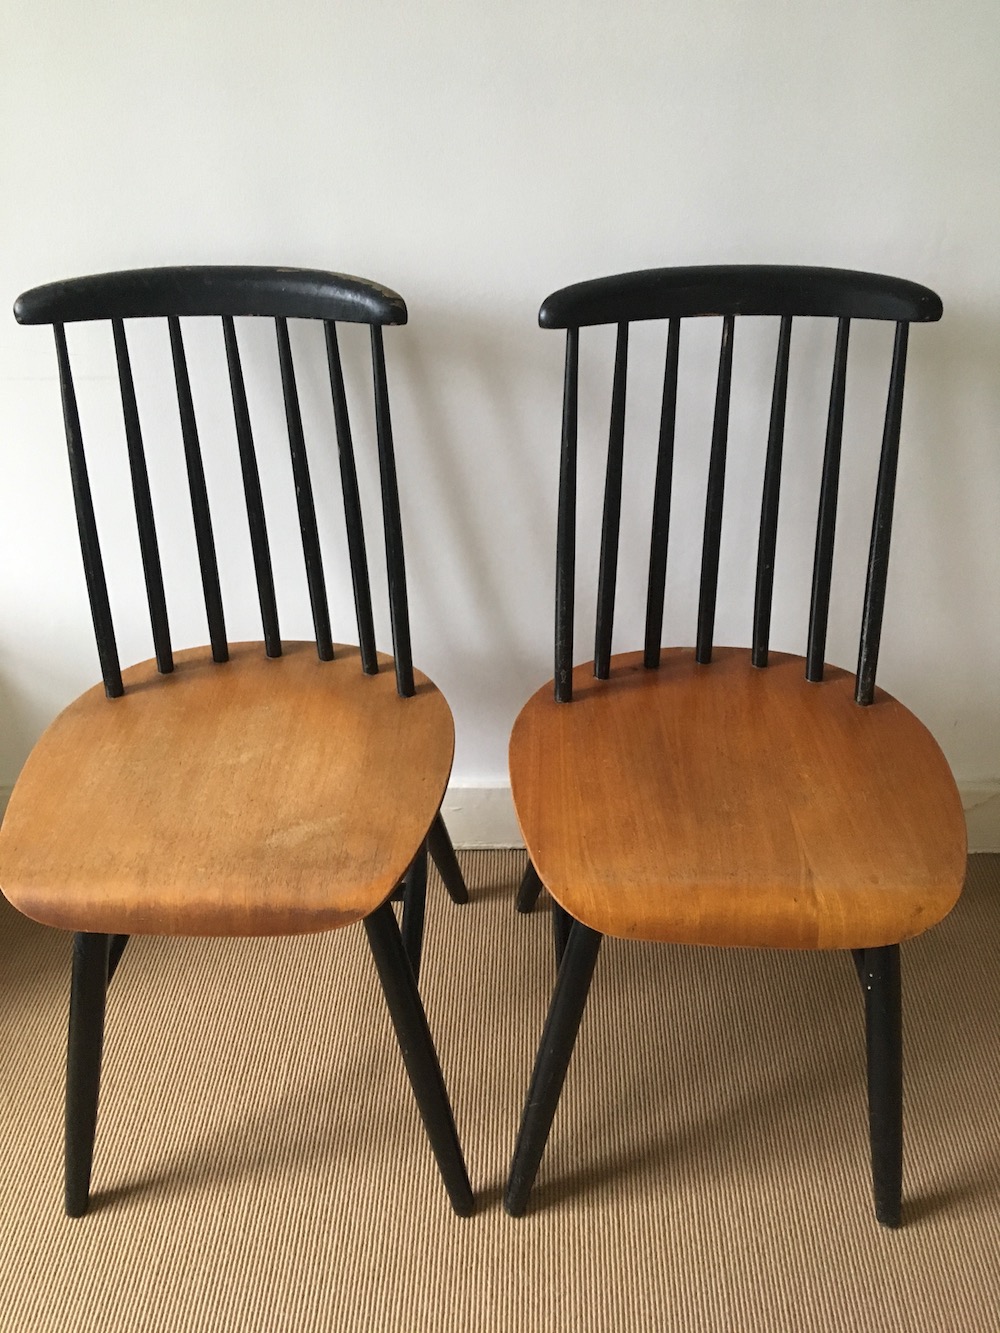 rs by Ilmari Tapiovaara, vintage chairs, fifties chairs, wooden chairs